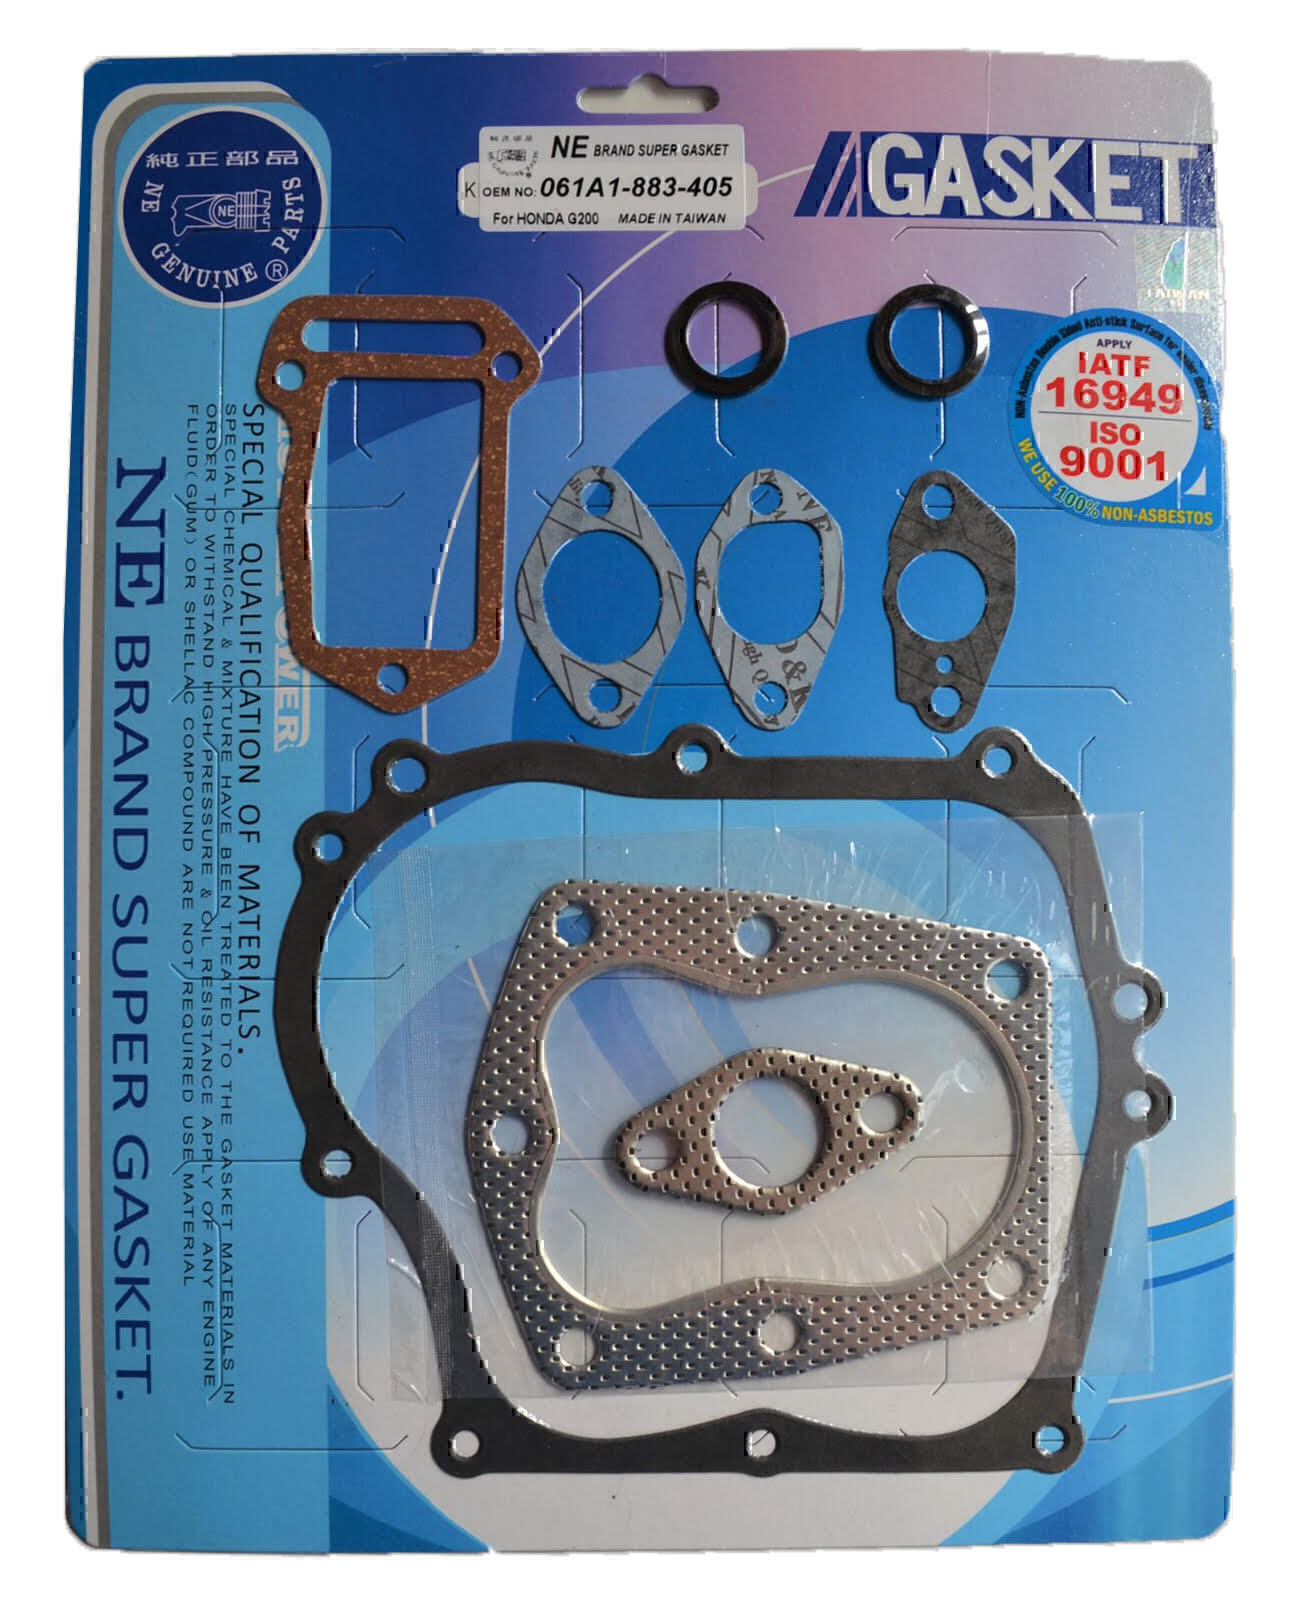 COMPLETE GASKET KIT FOR HONDA G200 G 200 5HP # 061A1-883-405